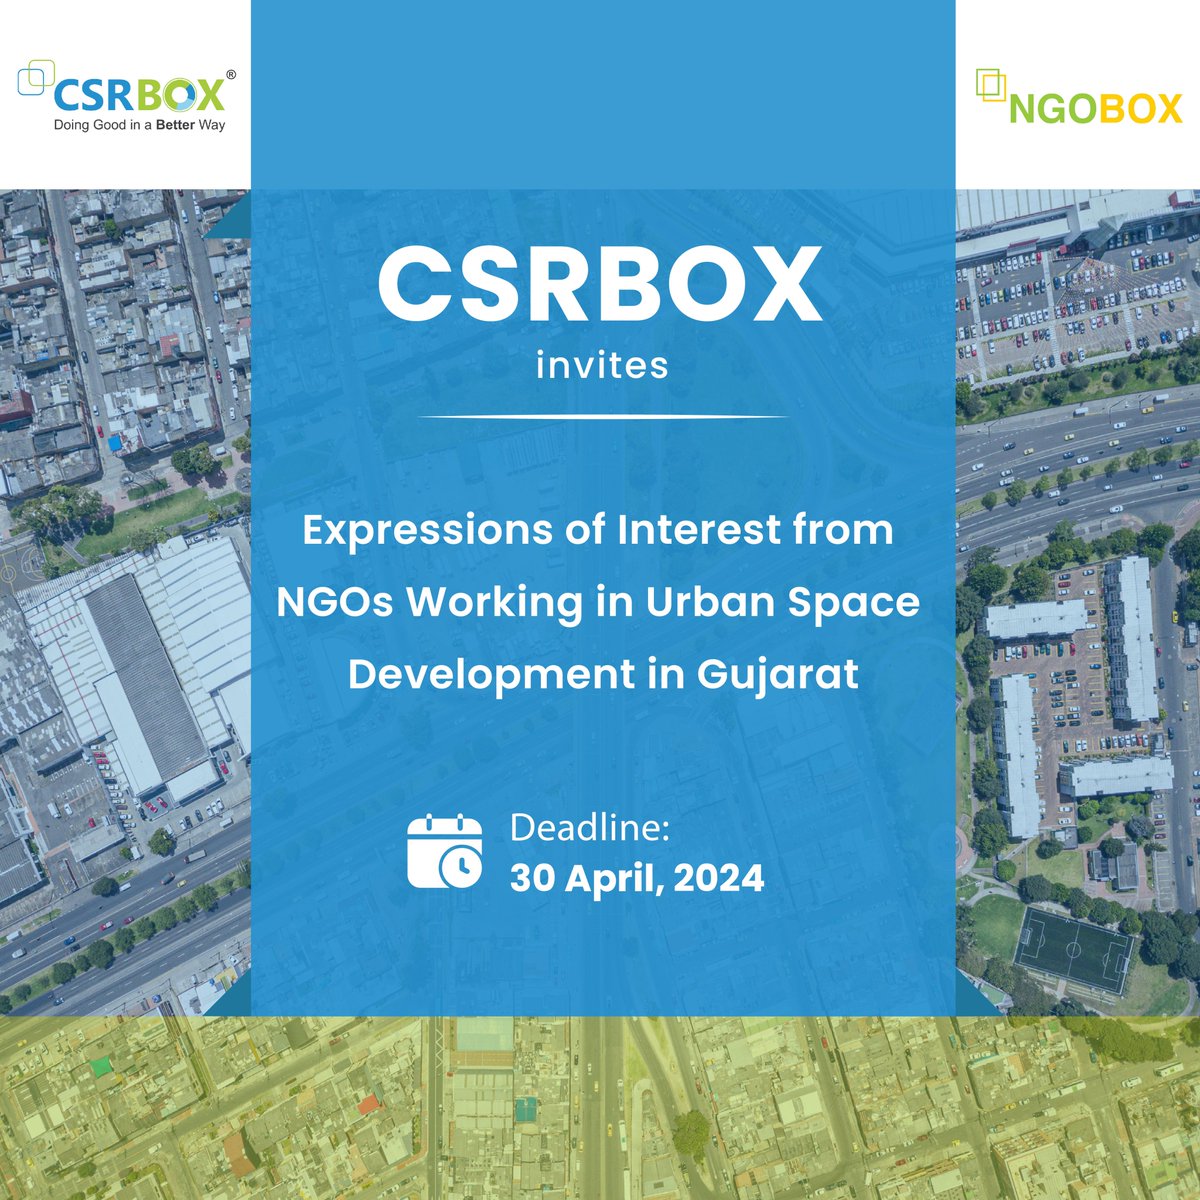 .@csrboxorg is inviting EOI from NGOs actively engaged in urban development in Gujarat. The initiative aims to bring together stakeholders to collectively address challenges and leverage opportunities for sustainable urban development. Apply: ngobox.org/full_rfp_eoi_E…